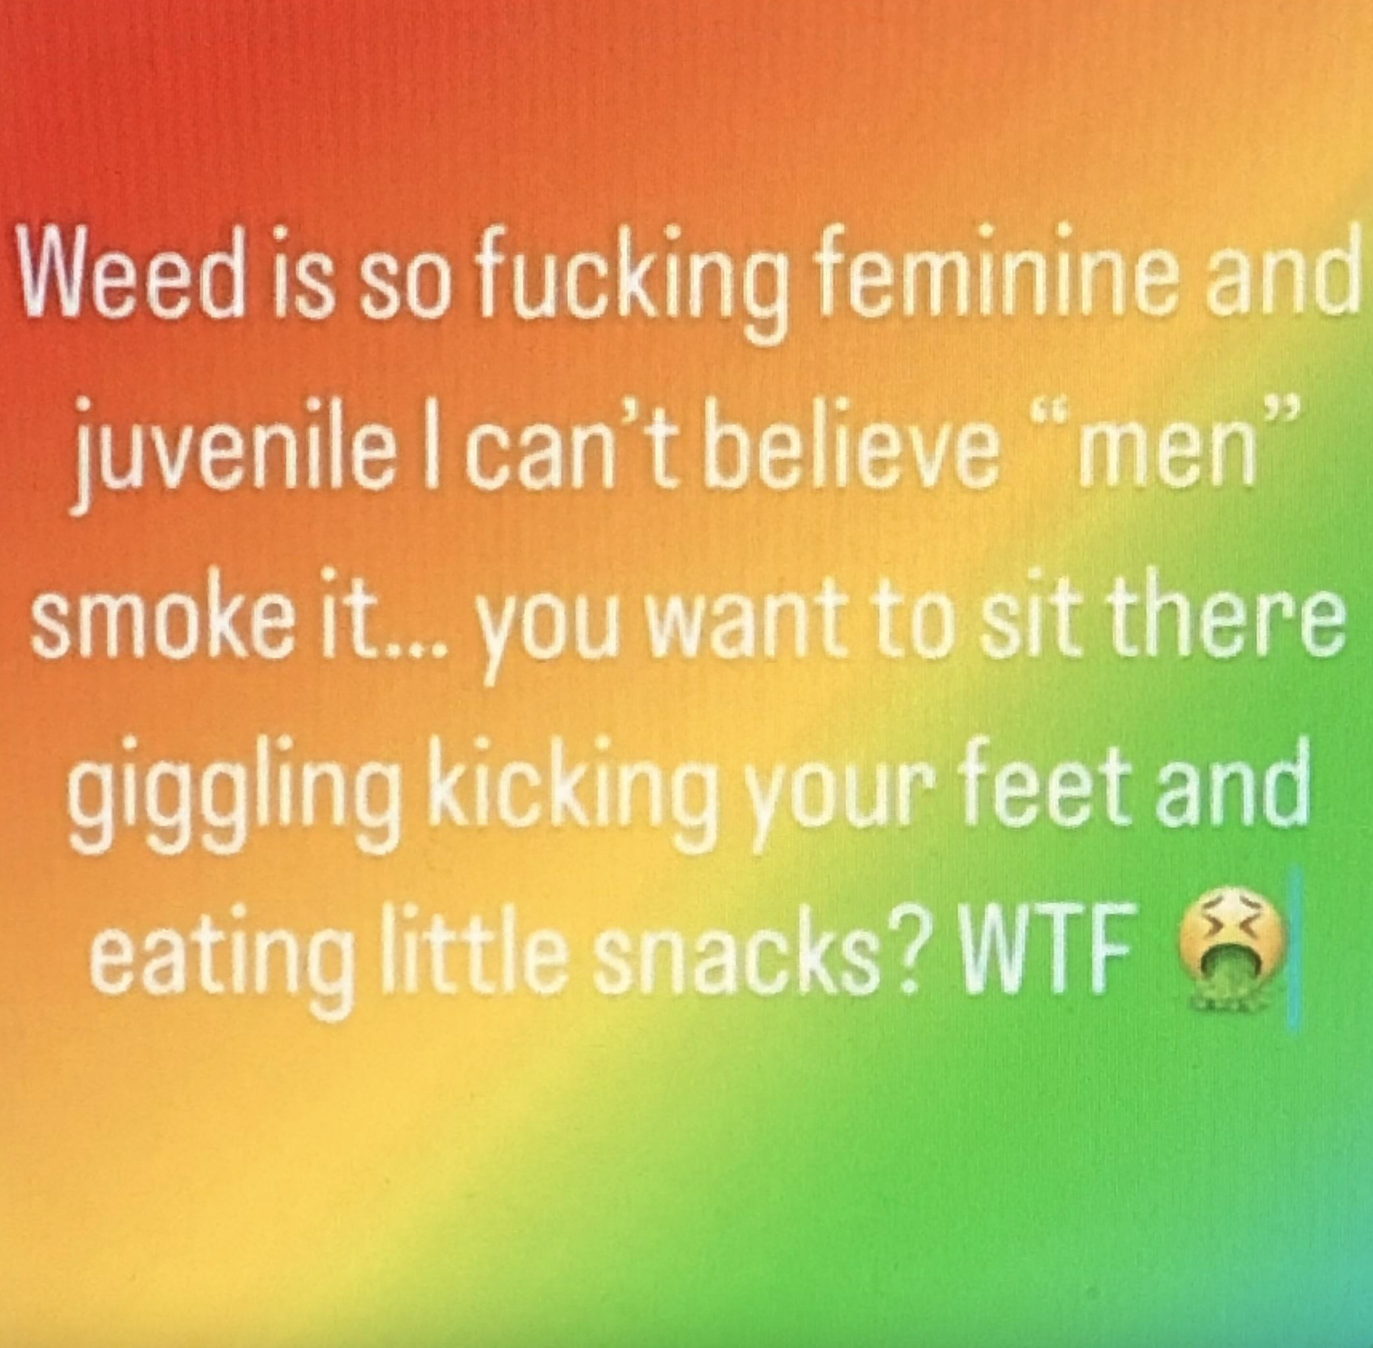 Someone saying, &quot;Weed is so fucking feminine and juvenile...&quot;